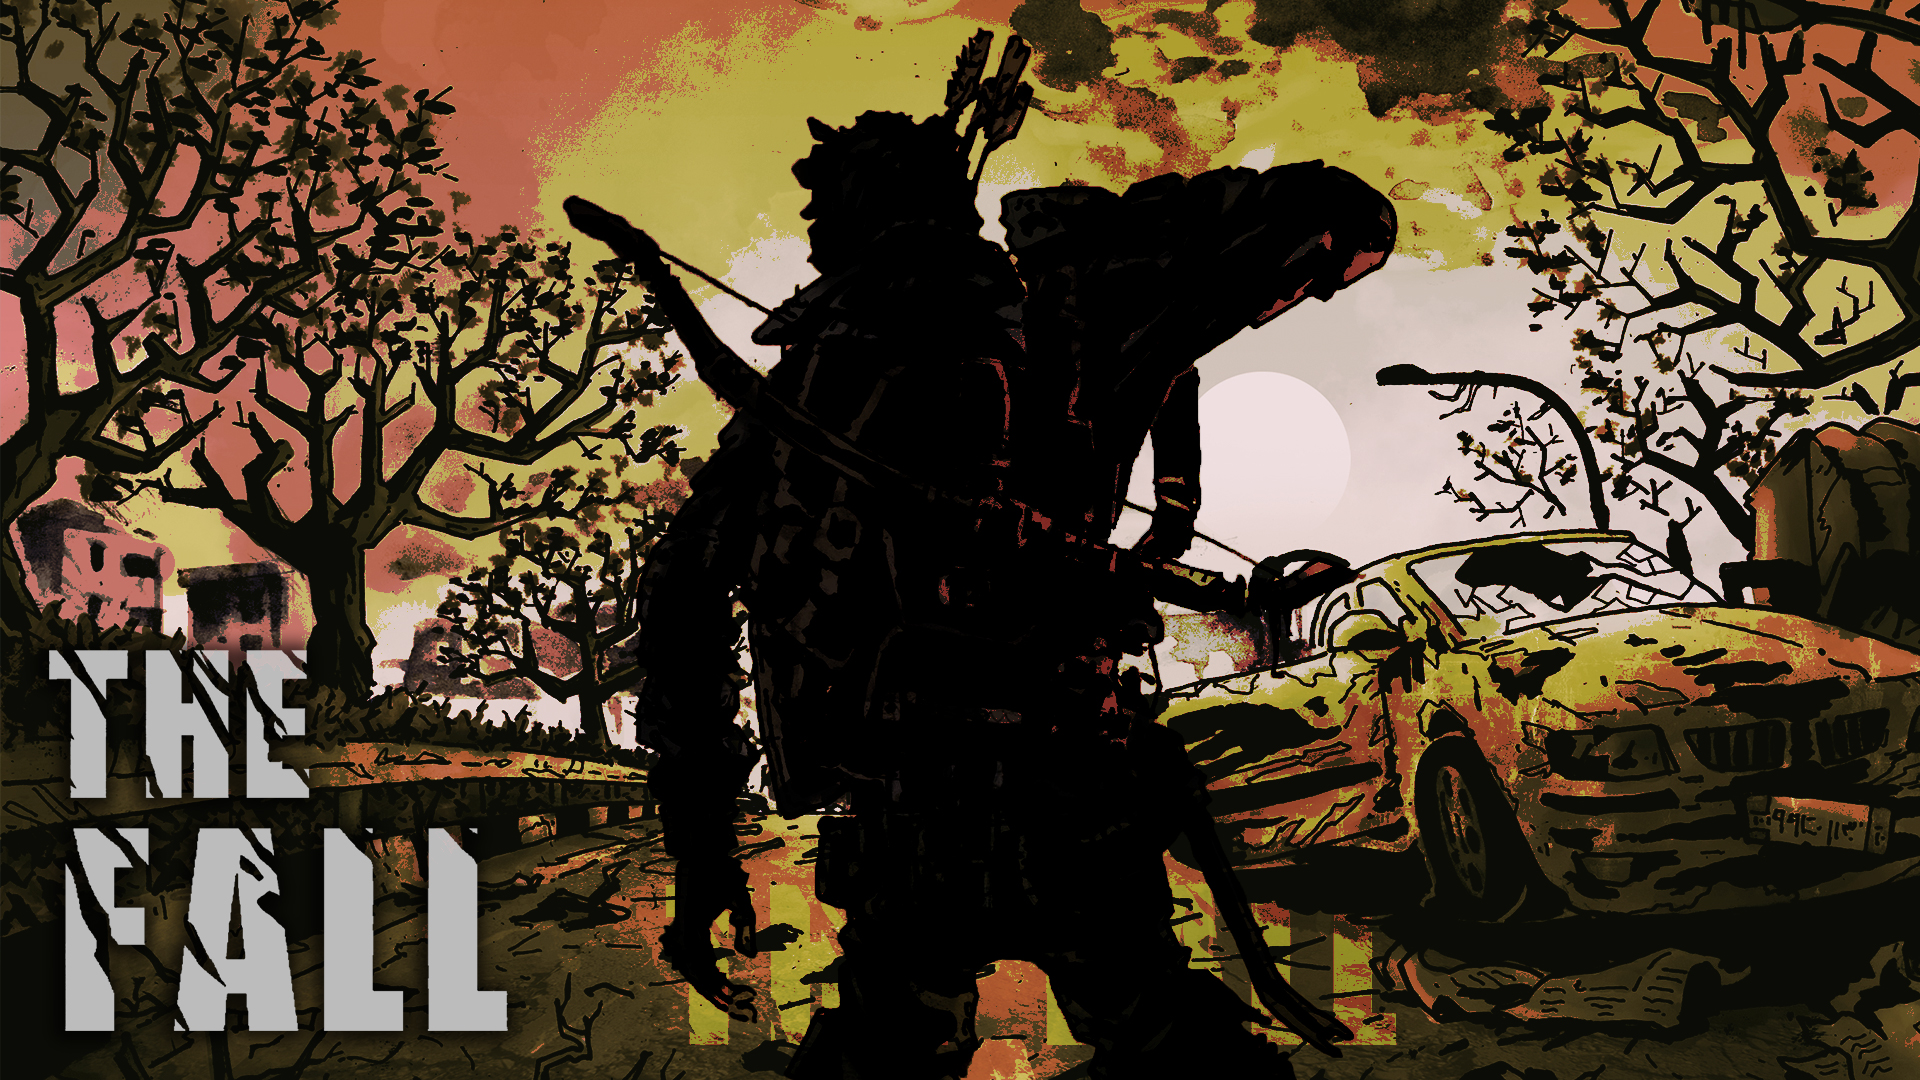 Scarica The Fall : Zombie Survival gratis per Android.